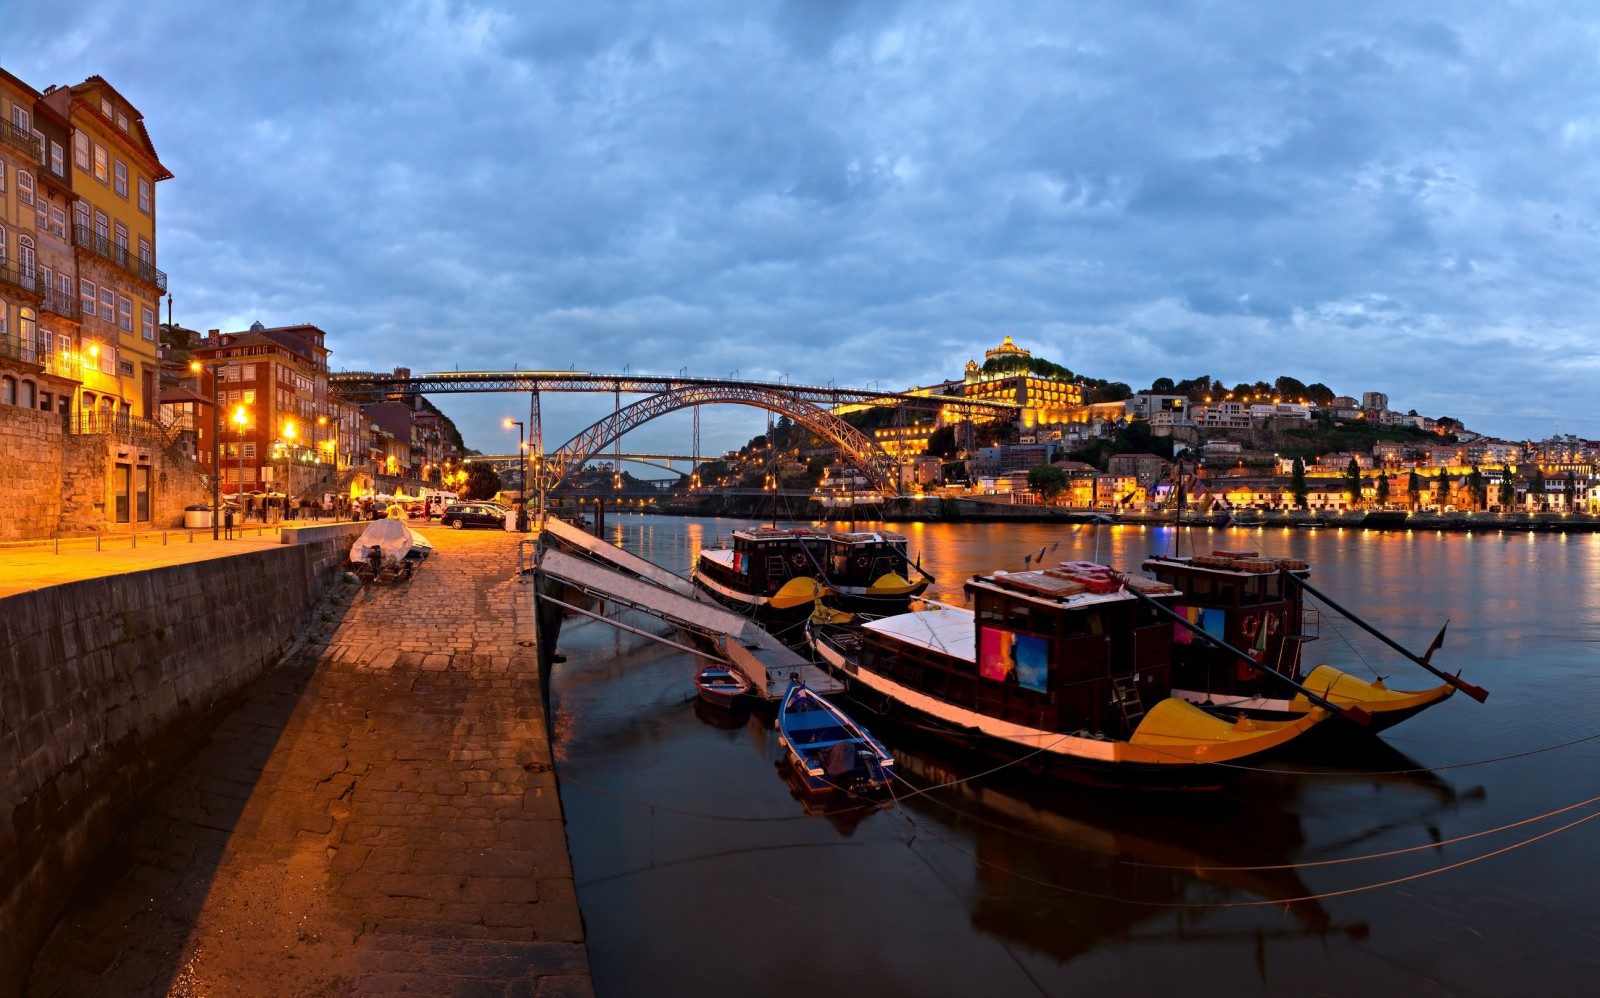 Visit-Portugal-panorama-old-Porto-river-Duoro-Vintage-Port-Transporting-Boats-Old-Town-Town-of-Gaia-and-Famous-Bridge-Ponte-Dom-Luis-1600x998